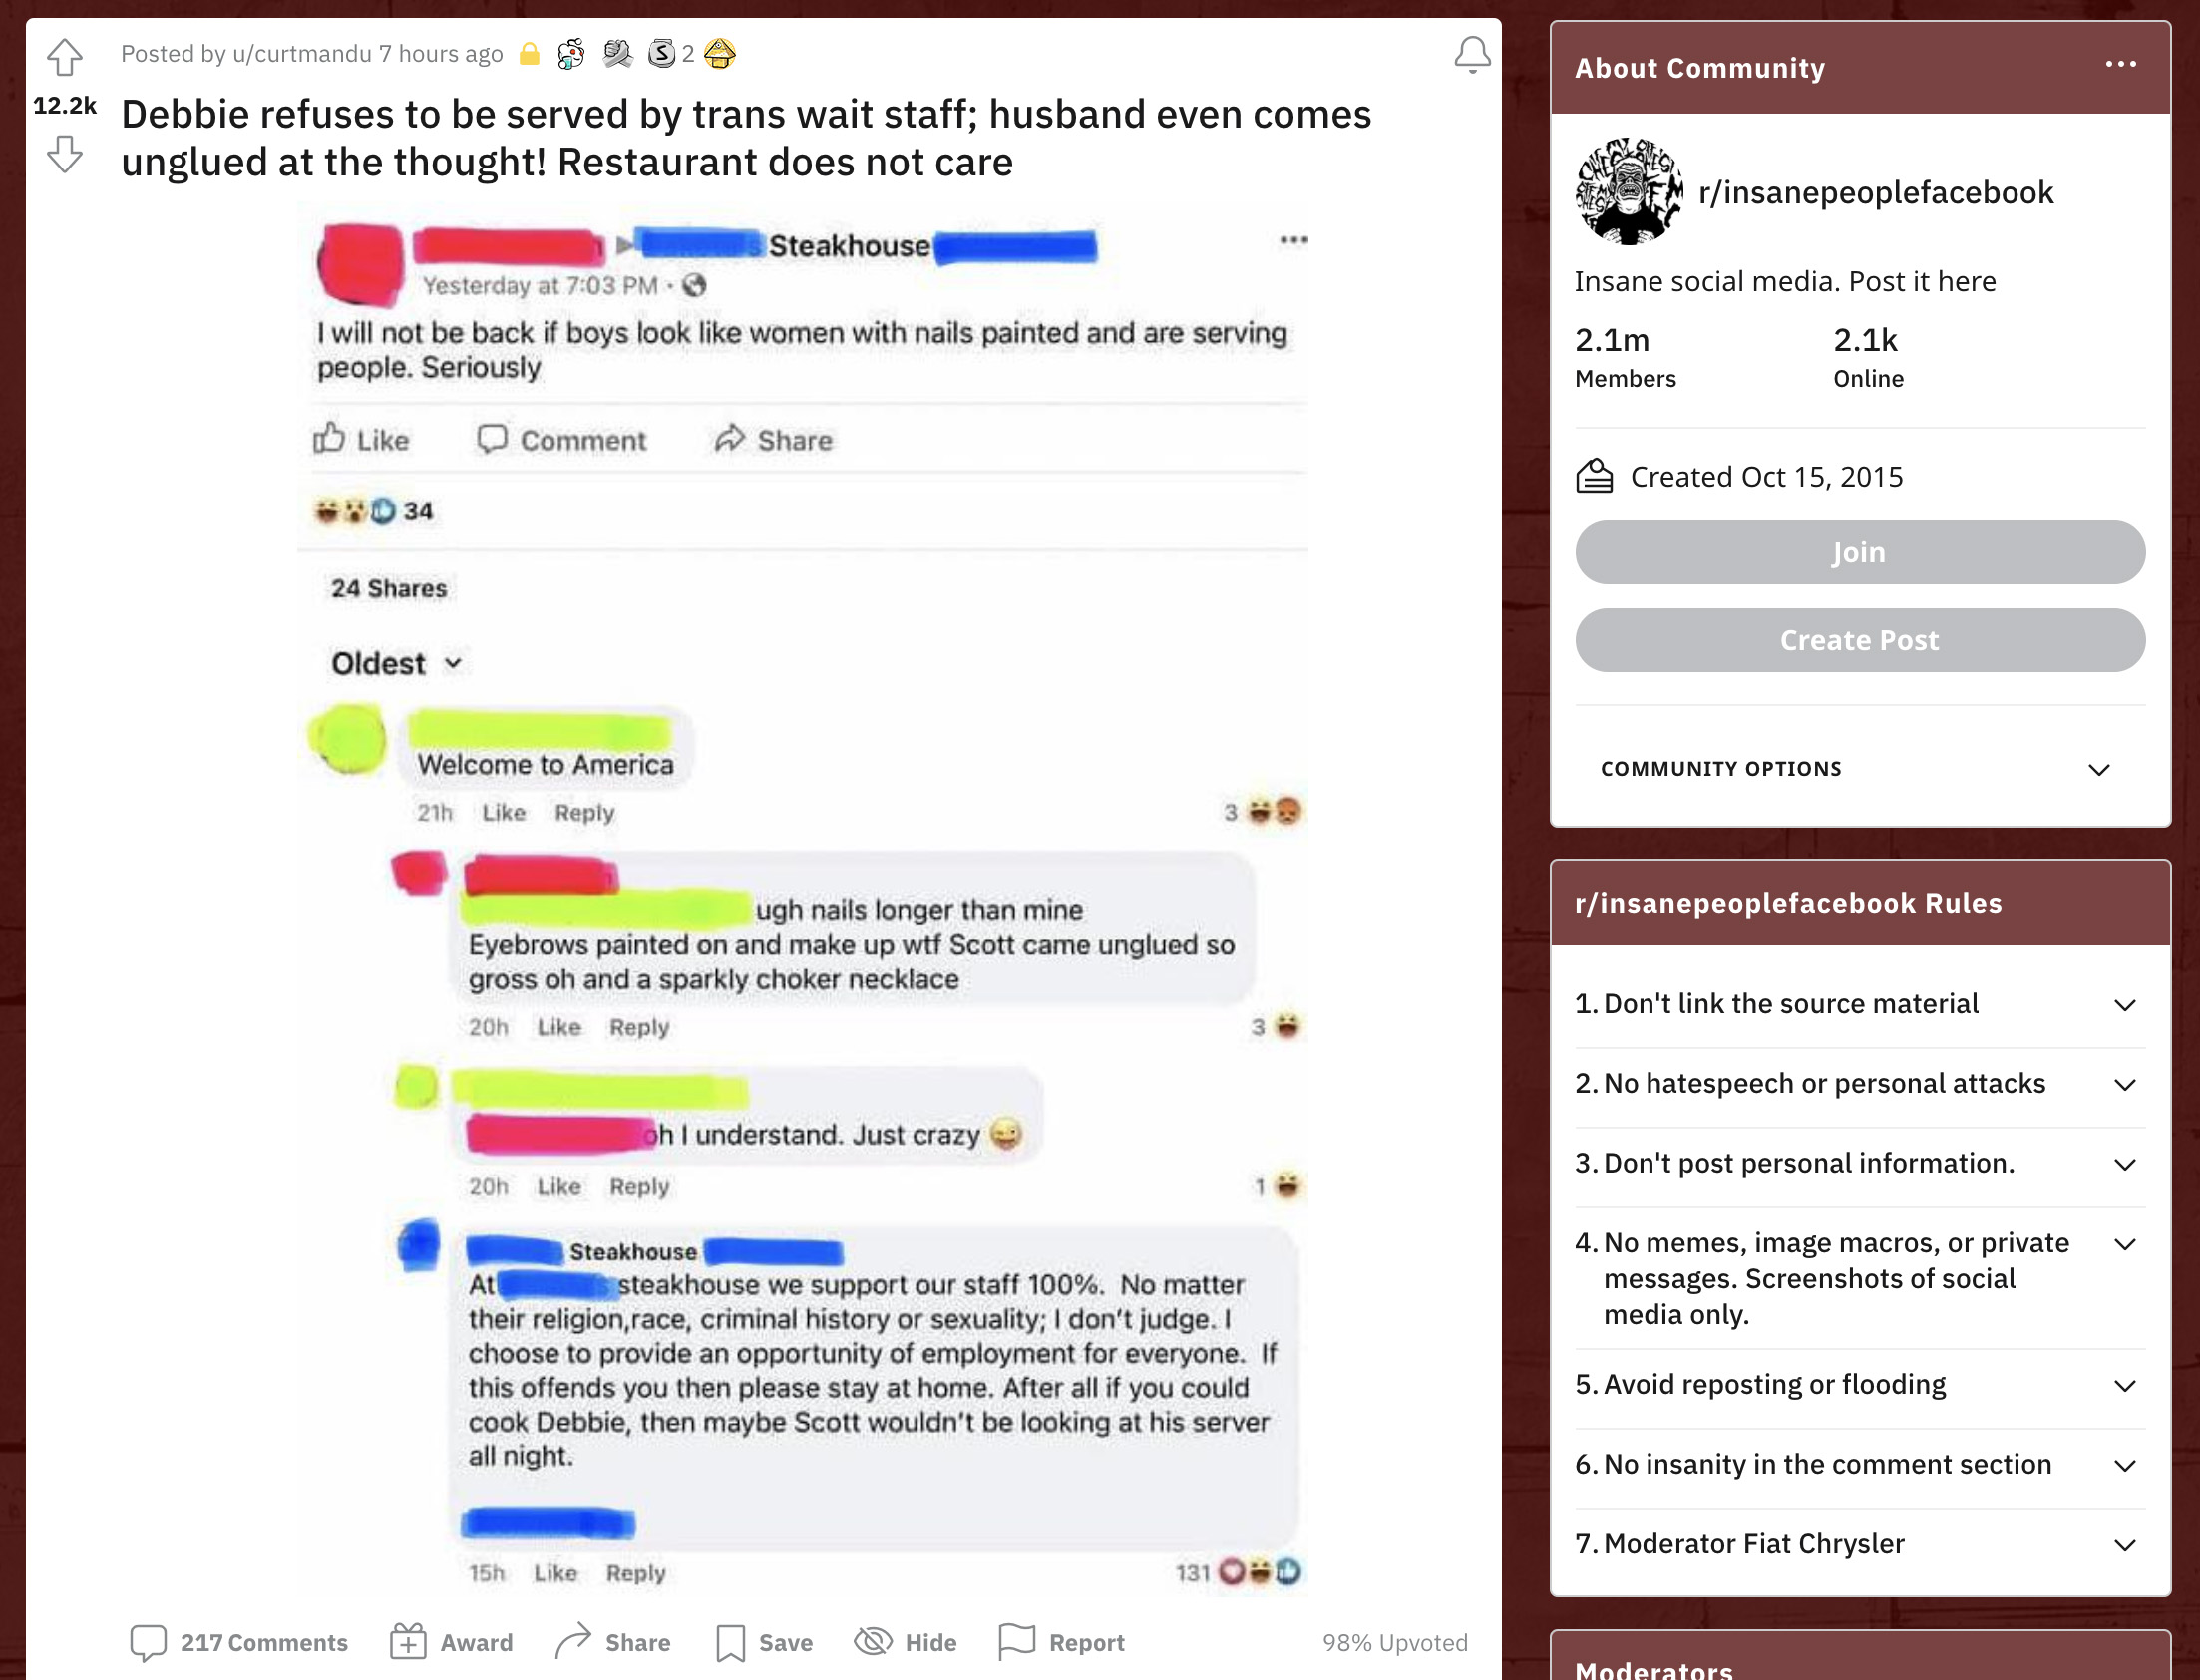 A Facebook user named Debbie purportedly refused to be served by transgender wait staff at Dakota's Steakhouse in Hereford Texas according to Reddit post.